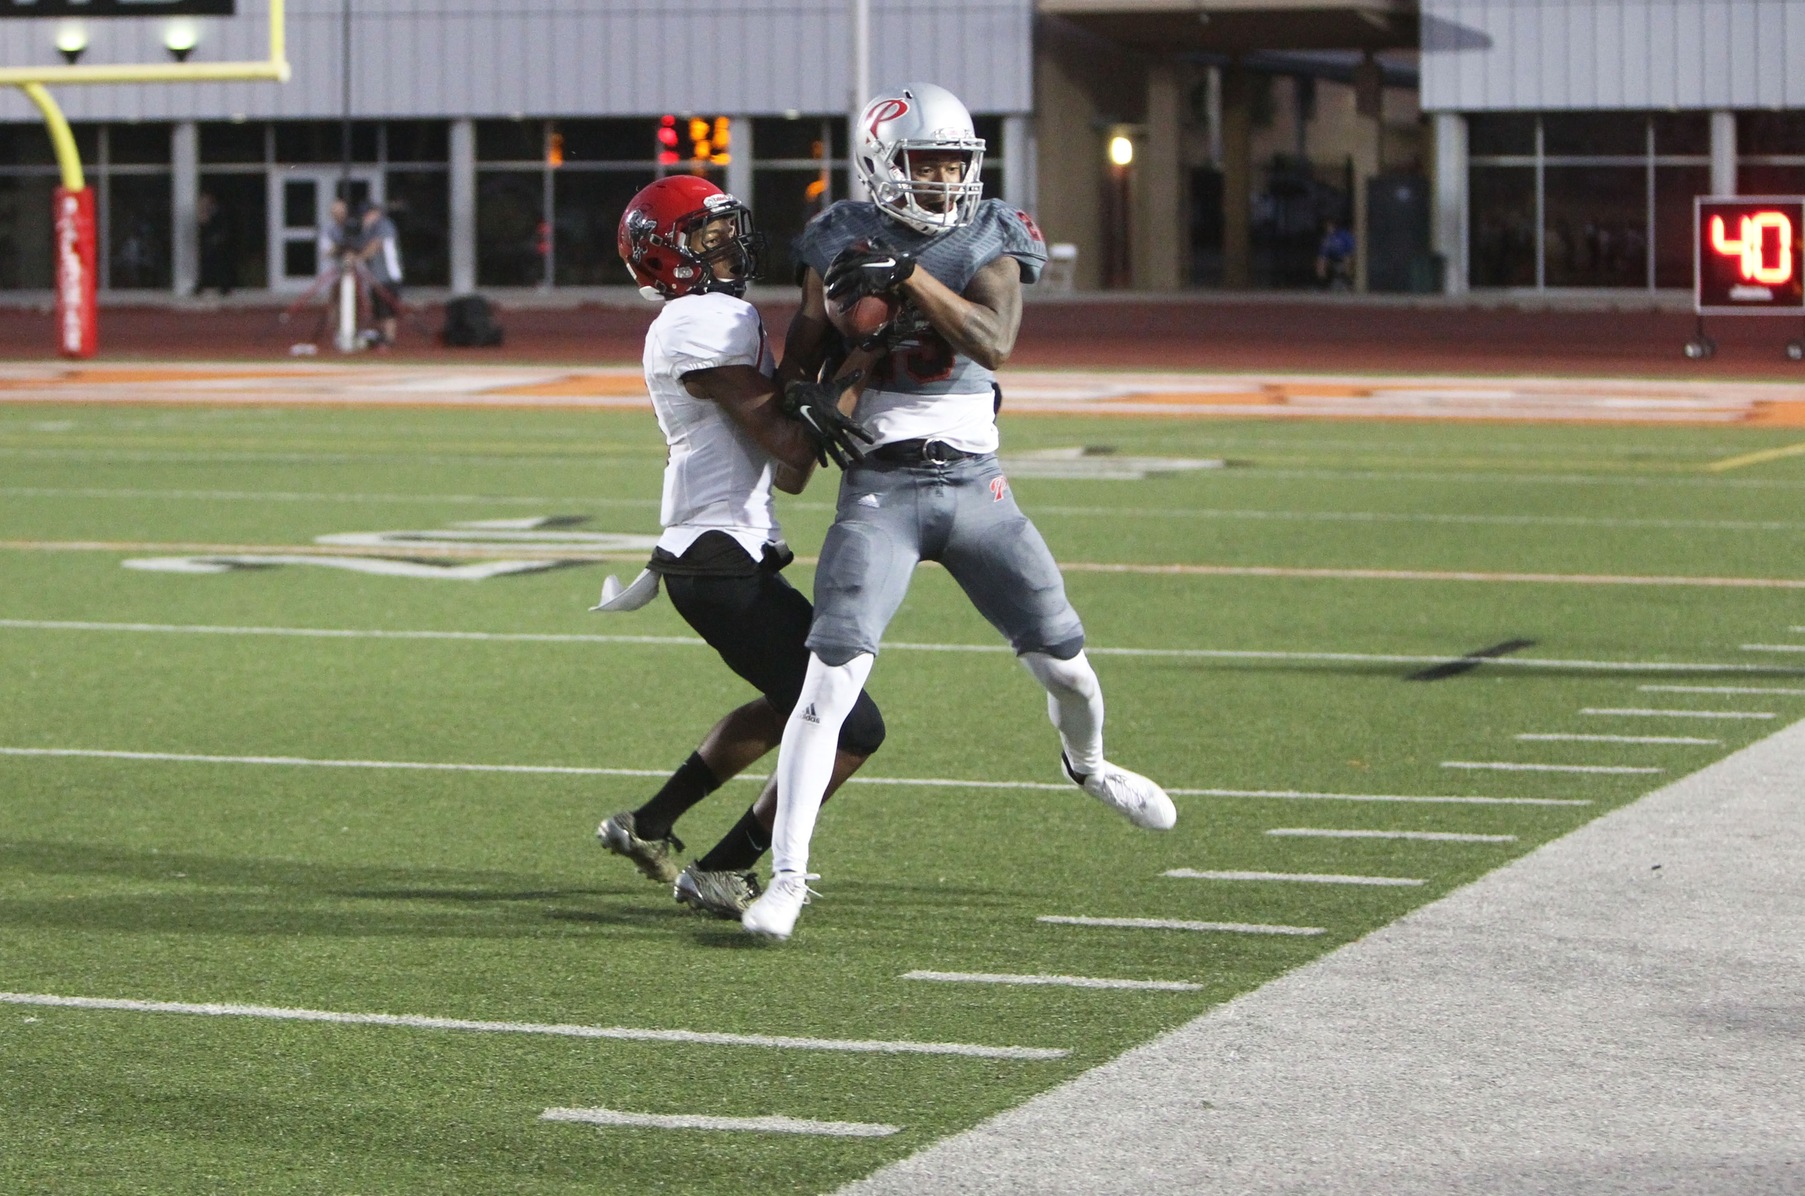 Currie Thomason catches 12-yard touchdown pass from Matt Romero that put Palomar up on Chaffey 31-19 with 8:12 left in the Comets' victory over the Panthers. -- Photo by Hugh Cox